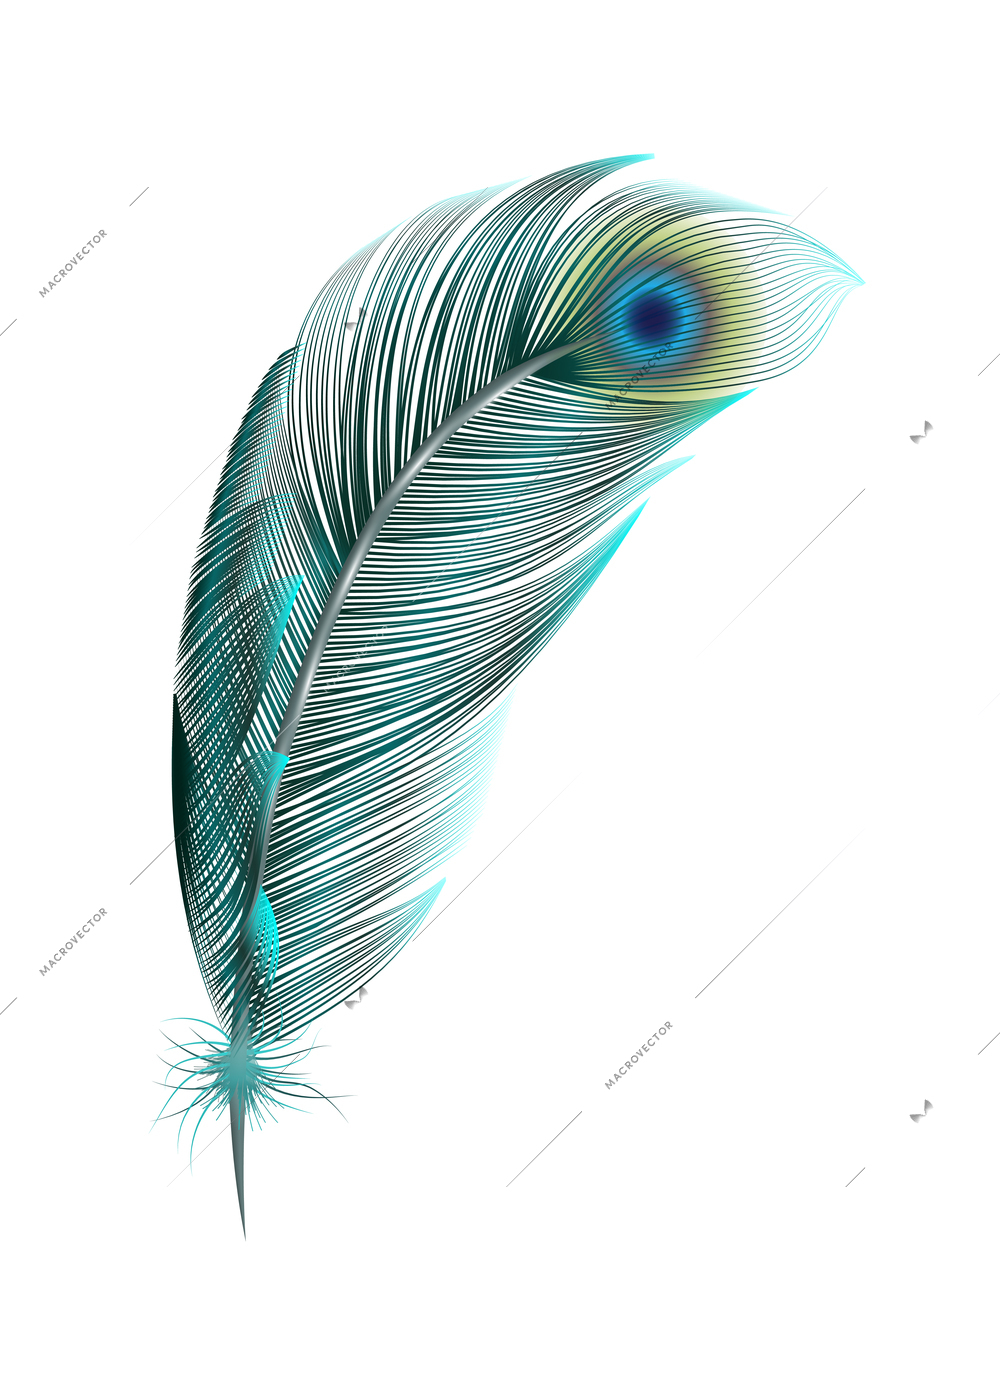 Color feathers realistic composition with isolated image of colored birds feather on blank background vector illustration